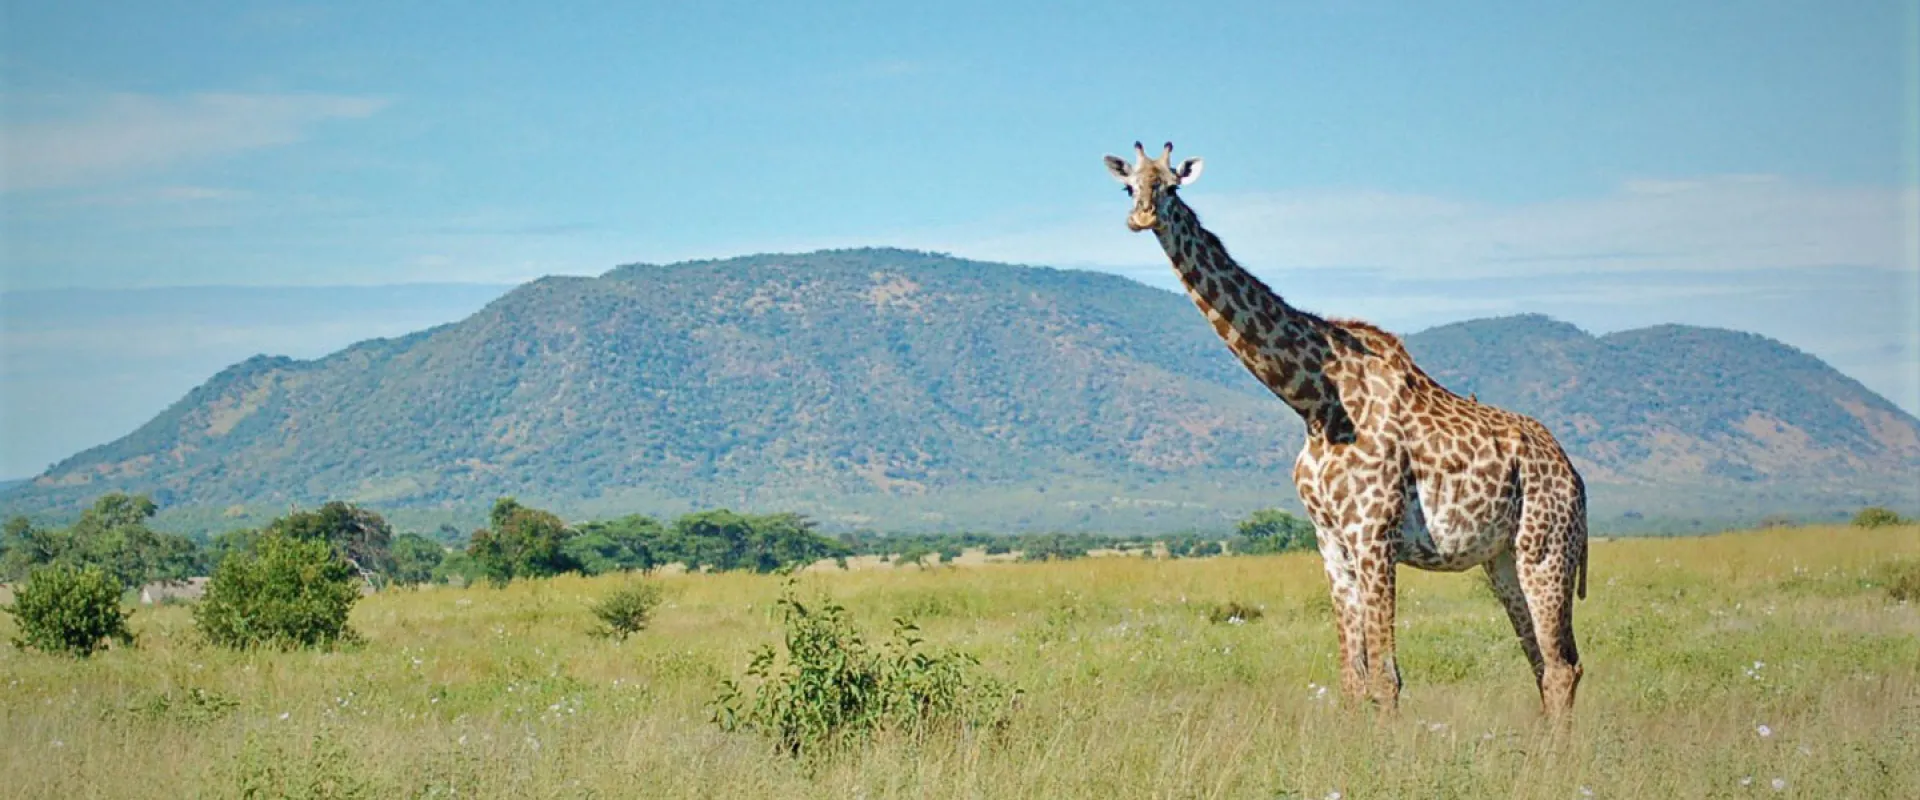 Seeing Spots in Tanzania: A Story of Giraffe Conservation